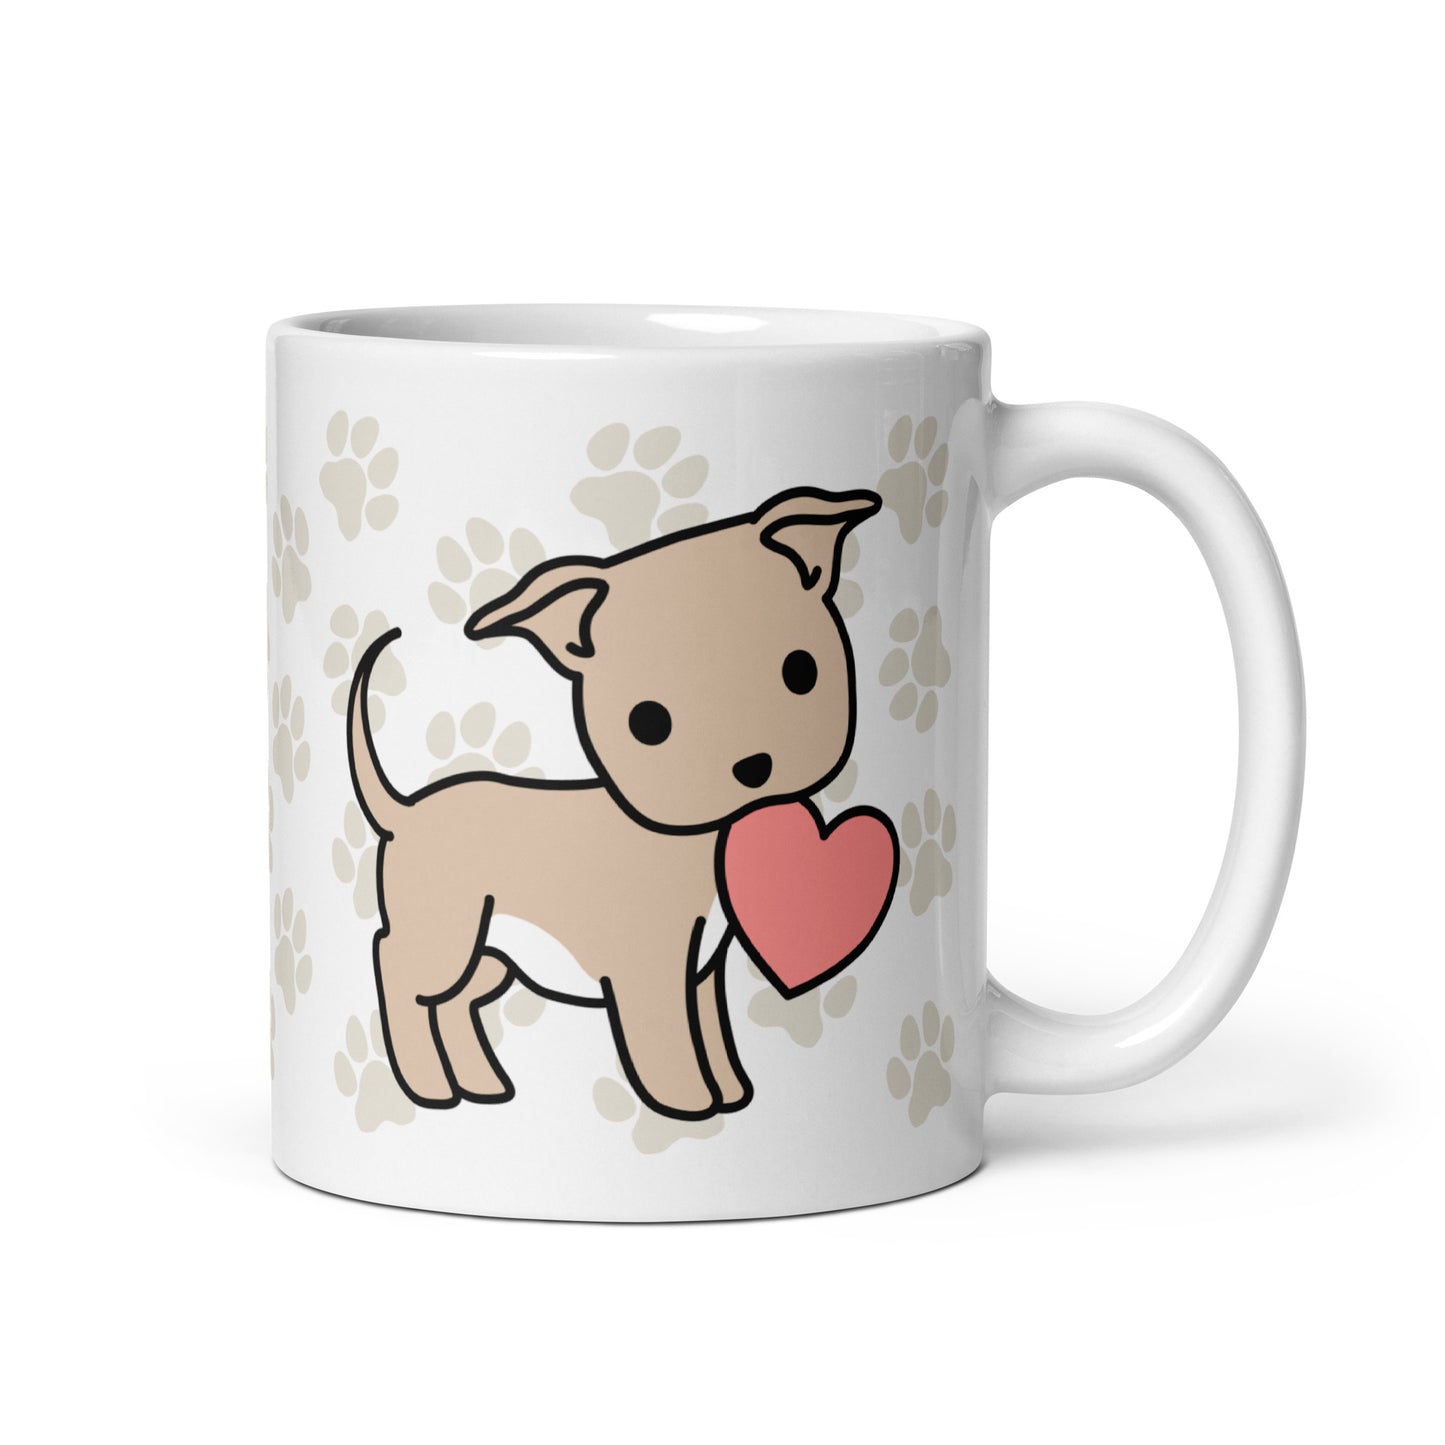 A white 11 ounce ceramic mug with a pattern of light brown pawprints all over. The mug also features a stylized illustration of a Pitbull holding a heart in its mouth.